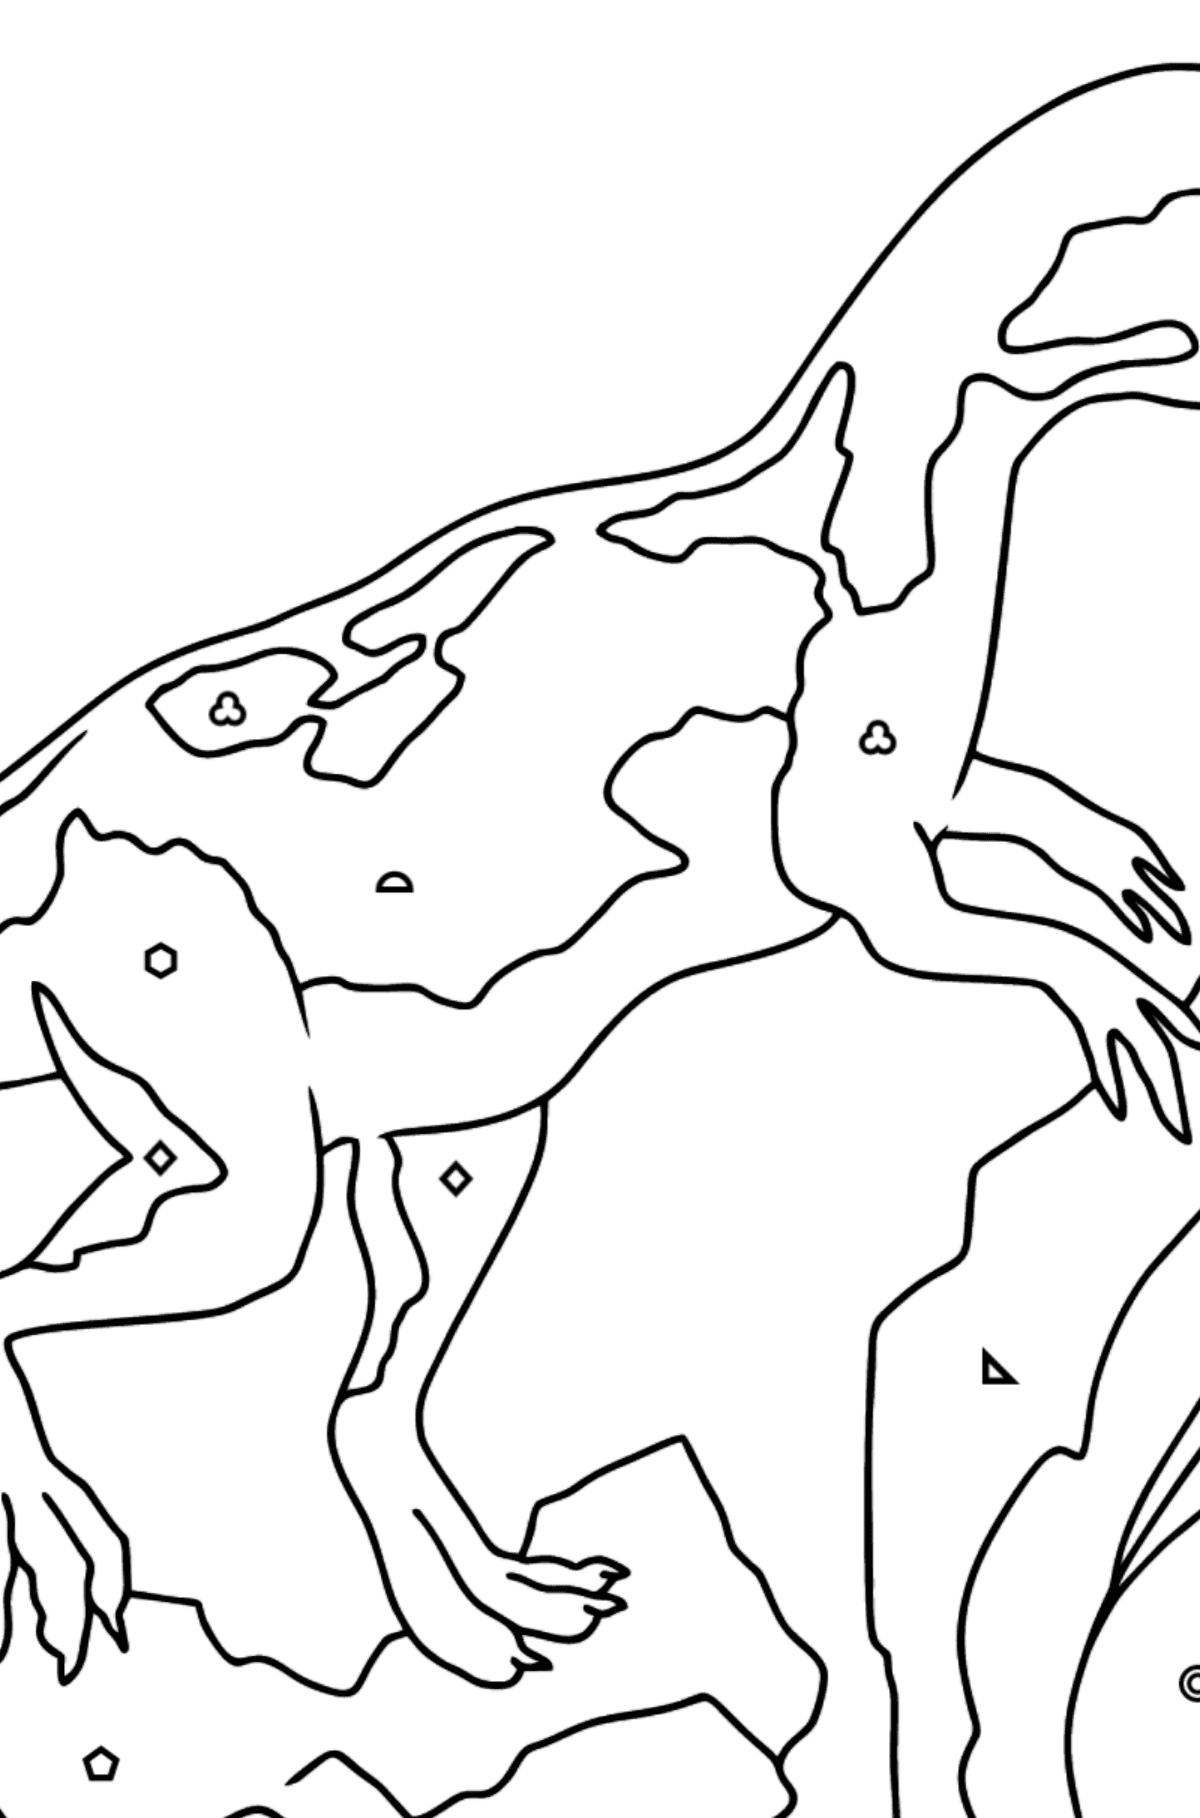 Coloring Page - Allosaurus - Jurassic Dinosaur - Coloring by Geometric Shapes for Kids